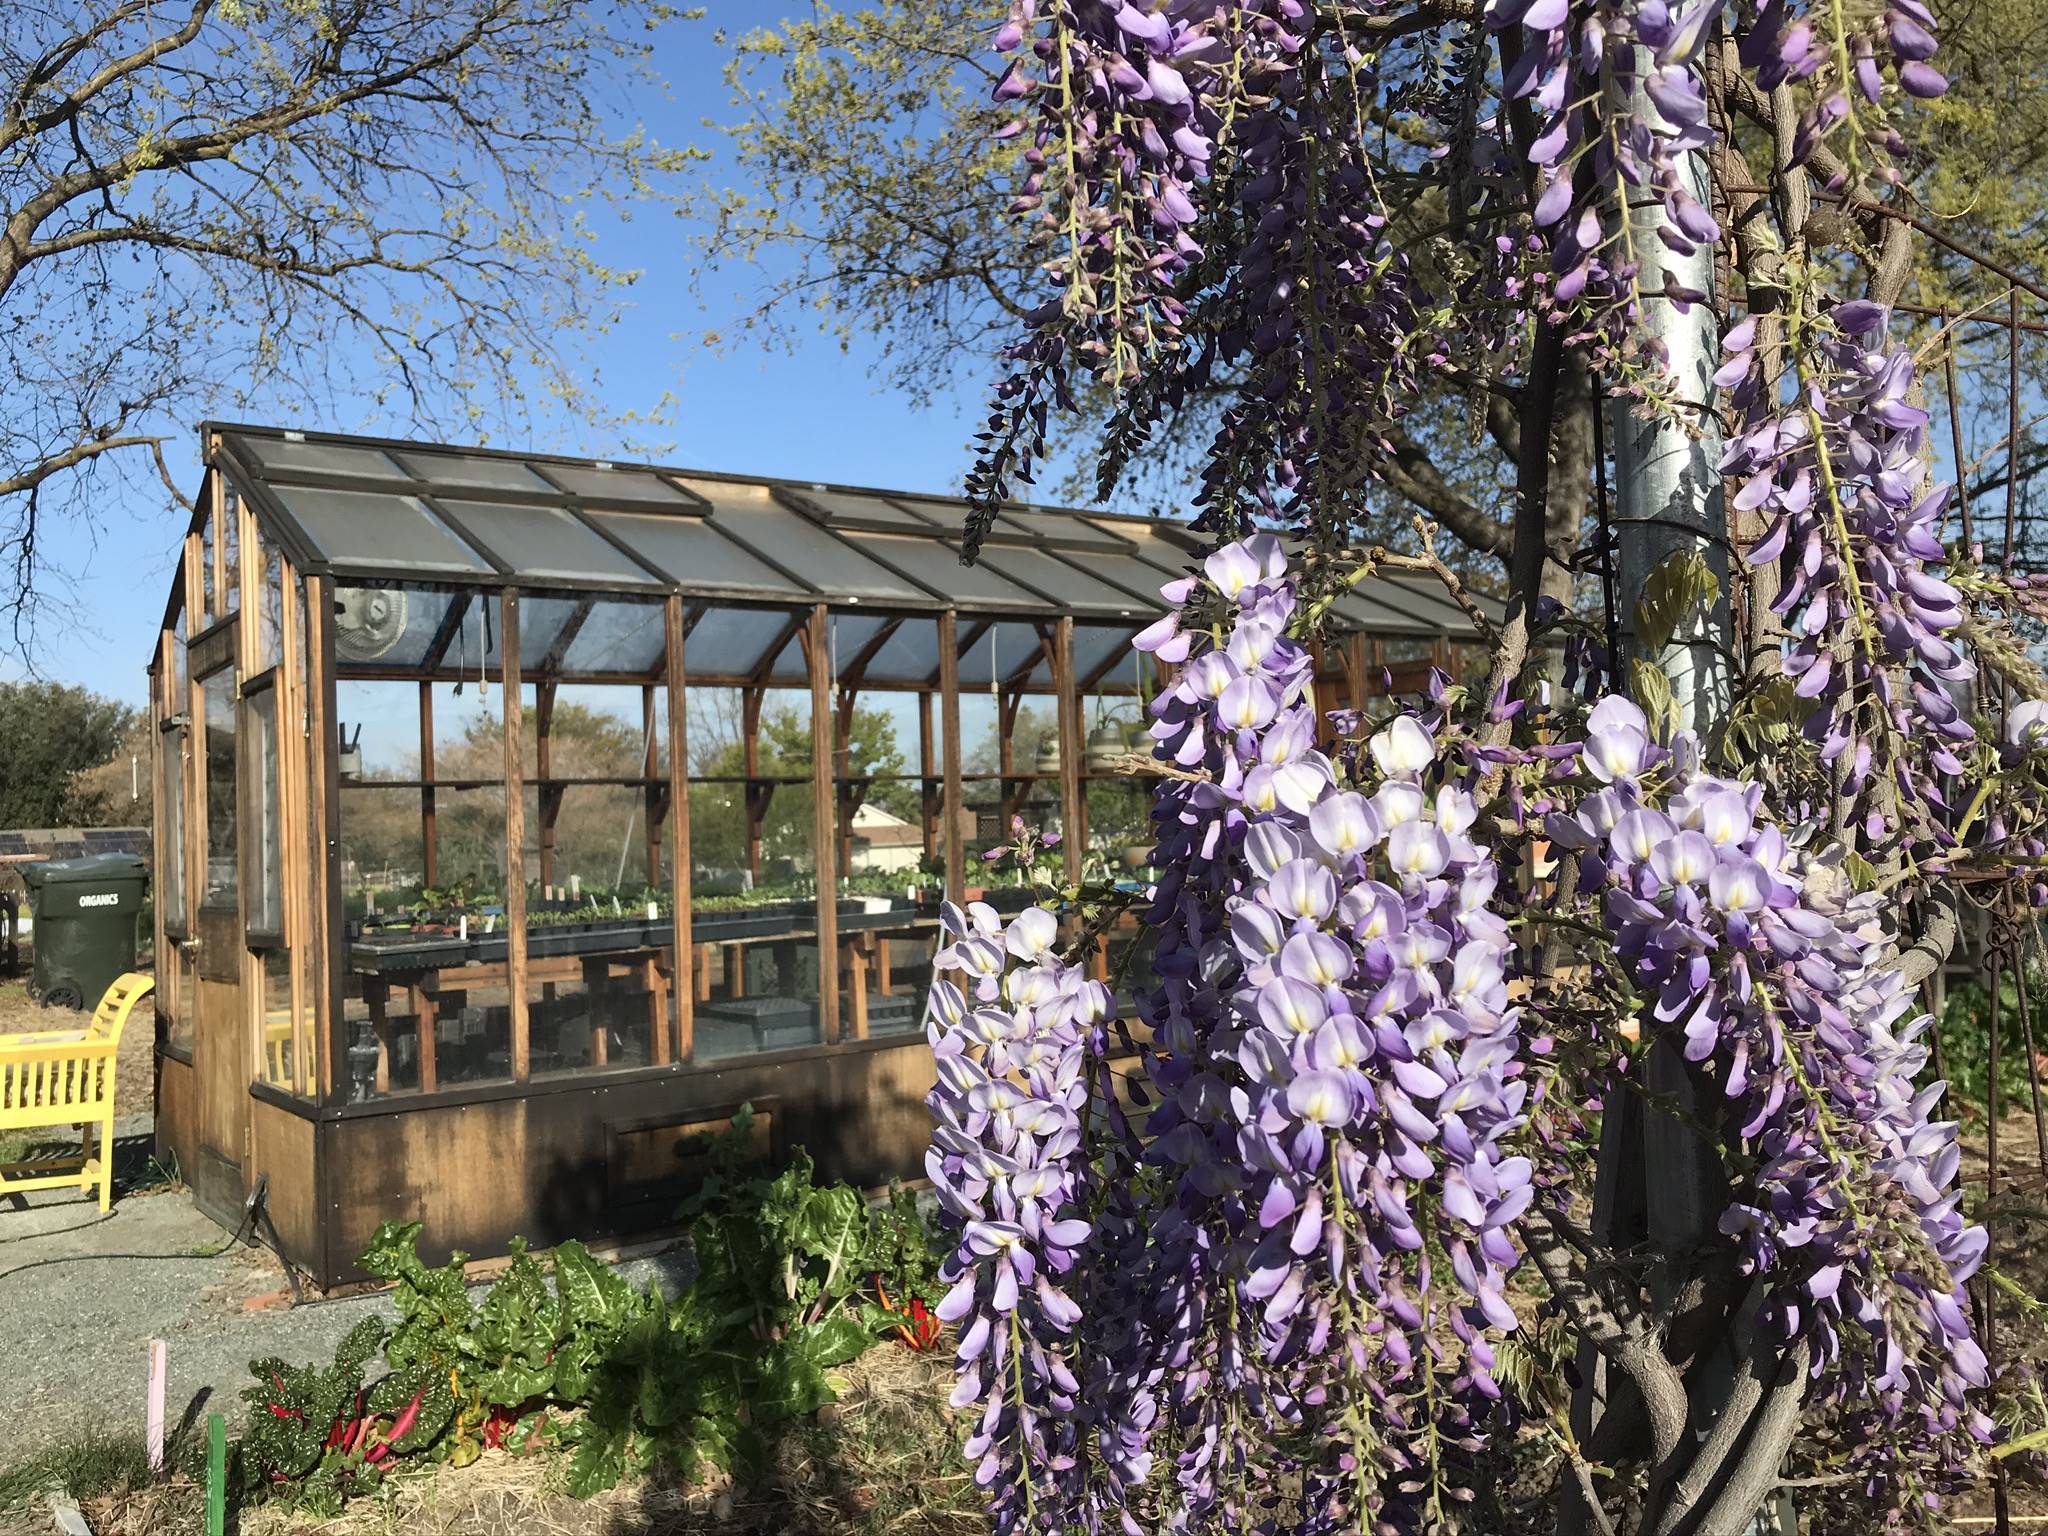 Wisteria plant blooming with greenhouse in background